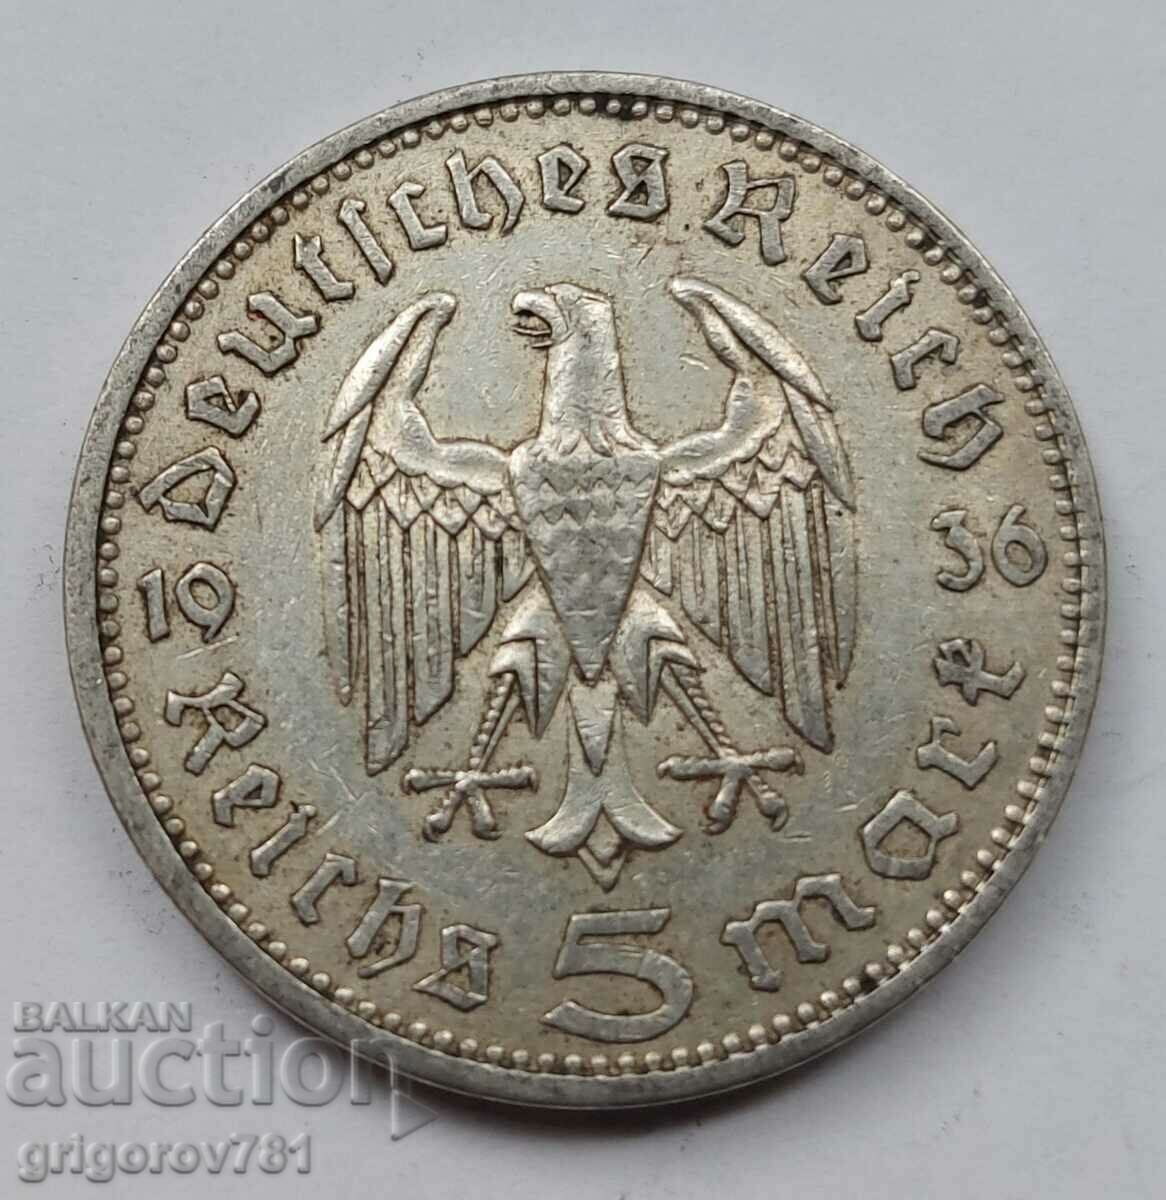 5 Mark Silver Germany 1936 A III Reich Silver Coin #55